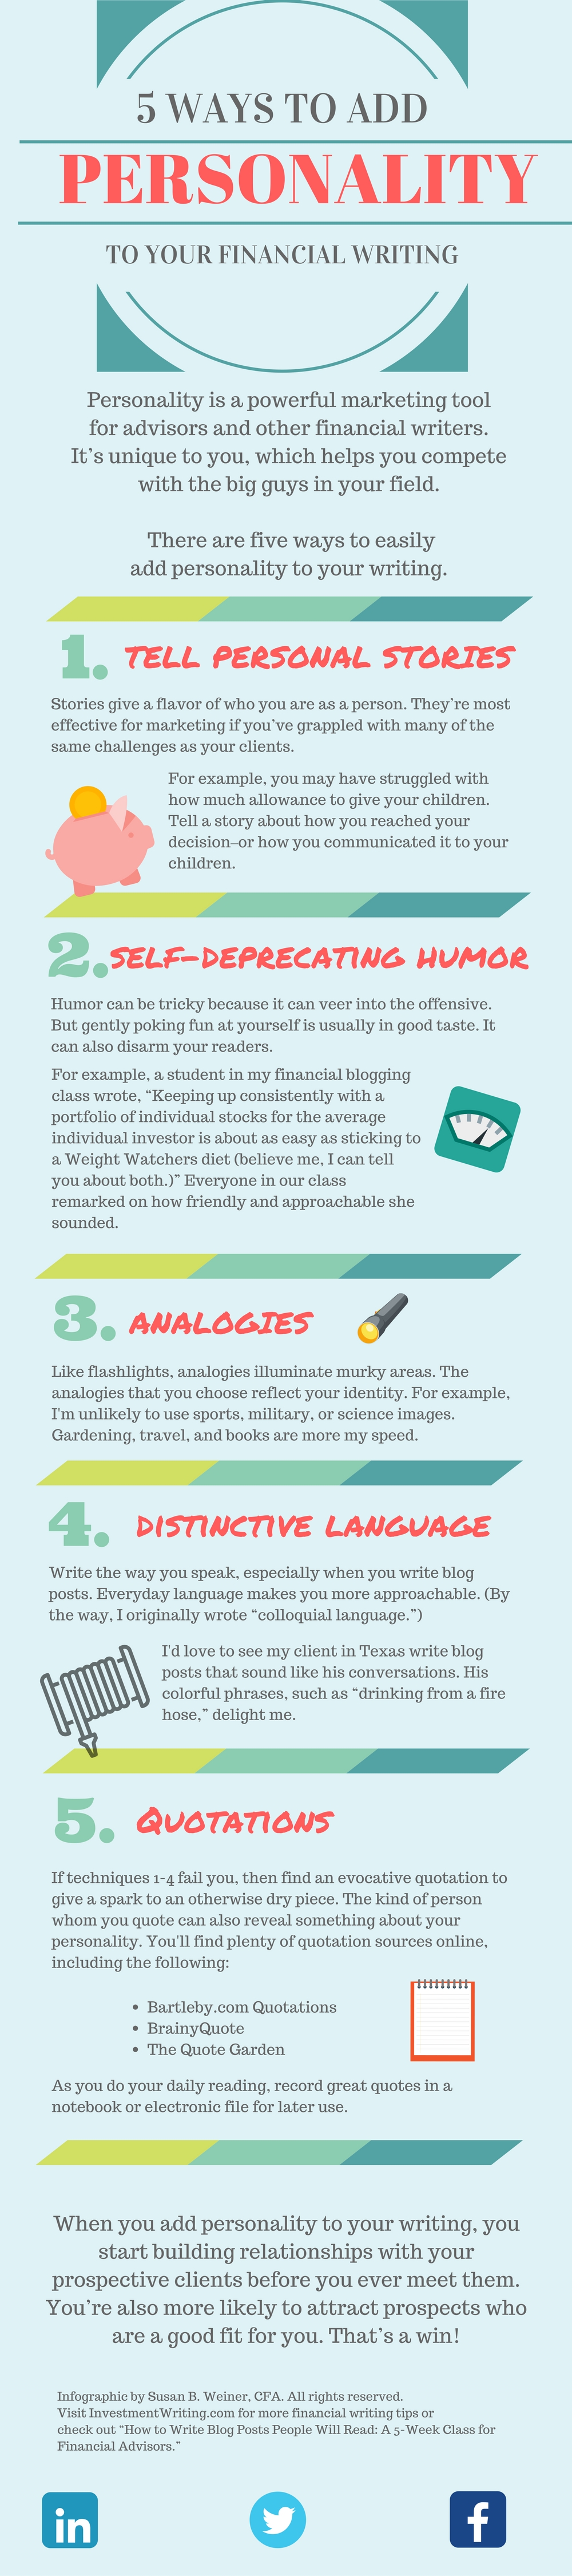 Infographic 5 ways to add personality to your financial writiing